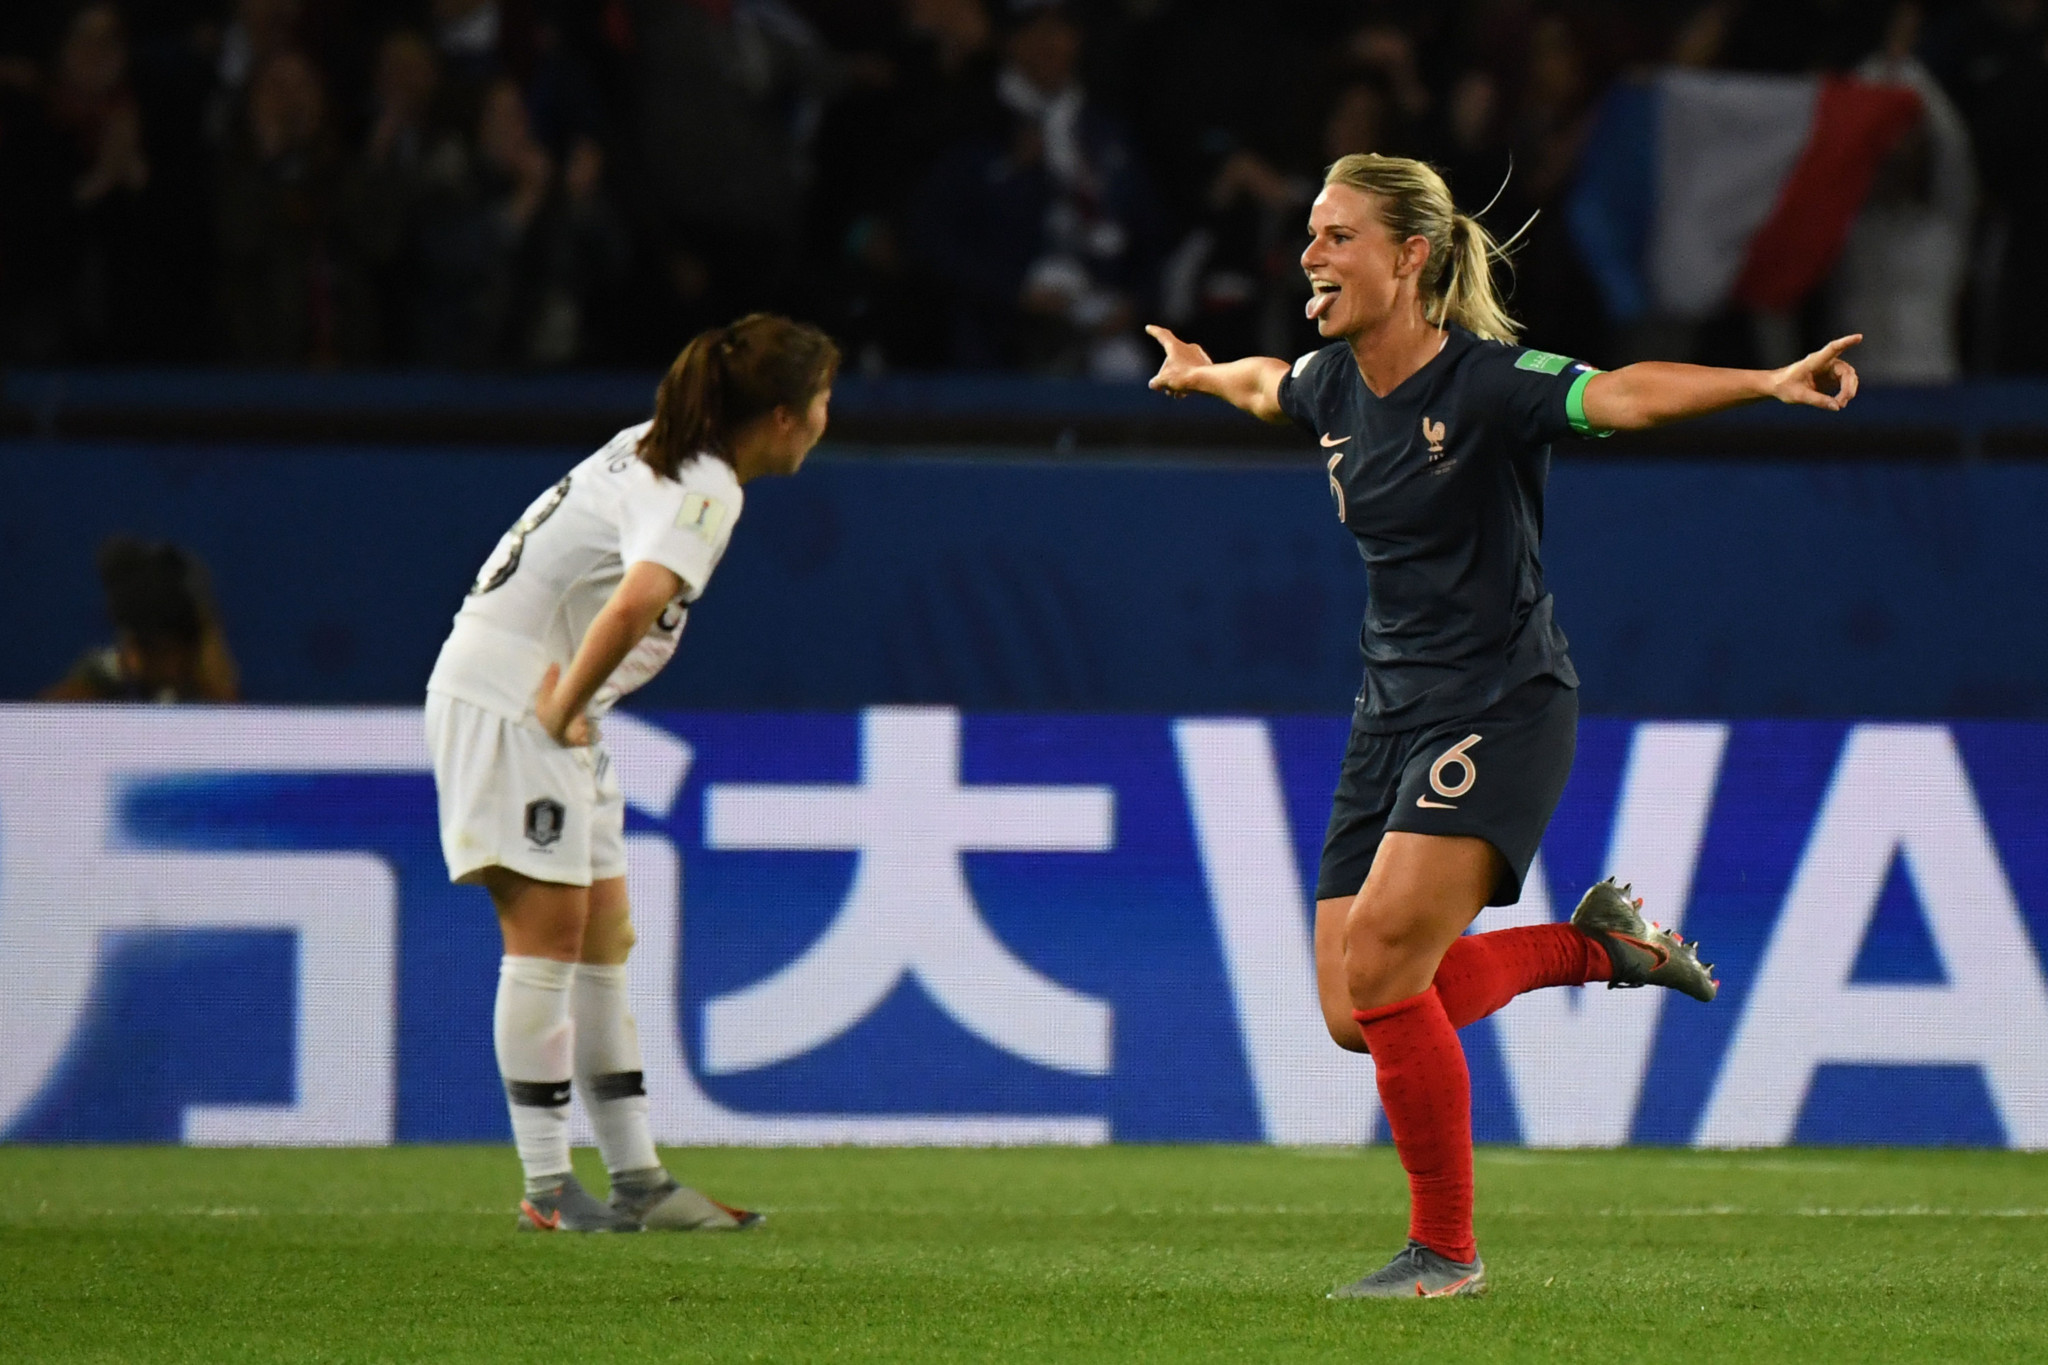 Her goal confirmed France's victory in their opening match as hosts ©Getty Images